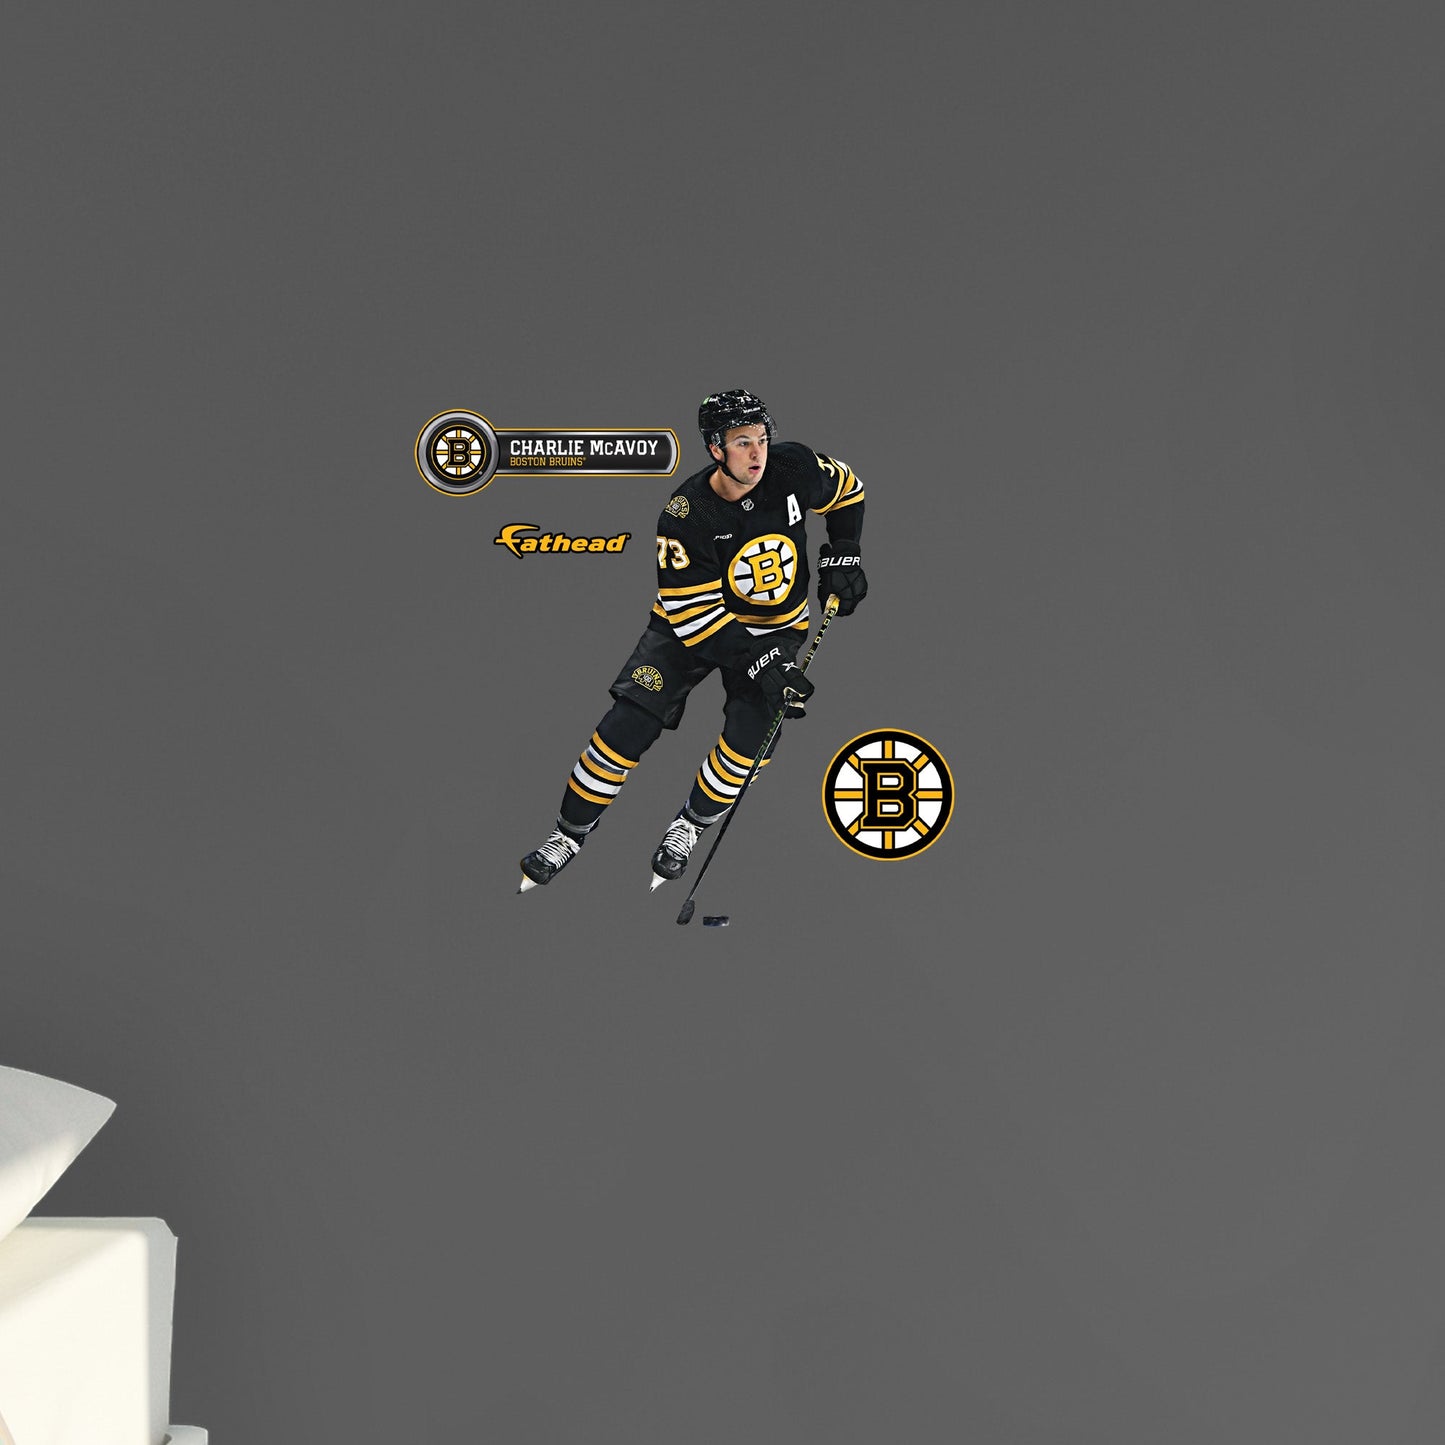 Boston Bruins: Charlie McAvoy         - Officially Licensed NHL Removable     Adhesive Decal